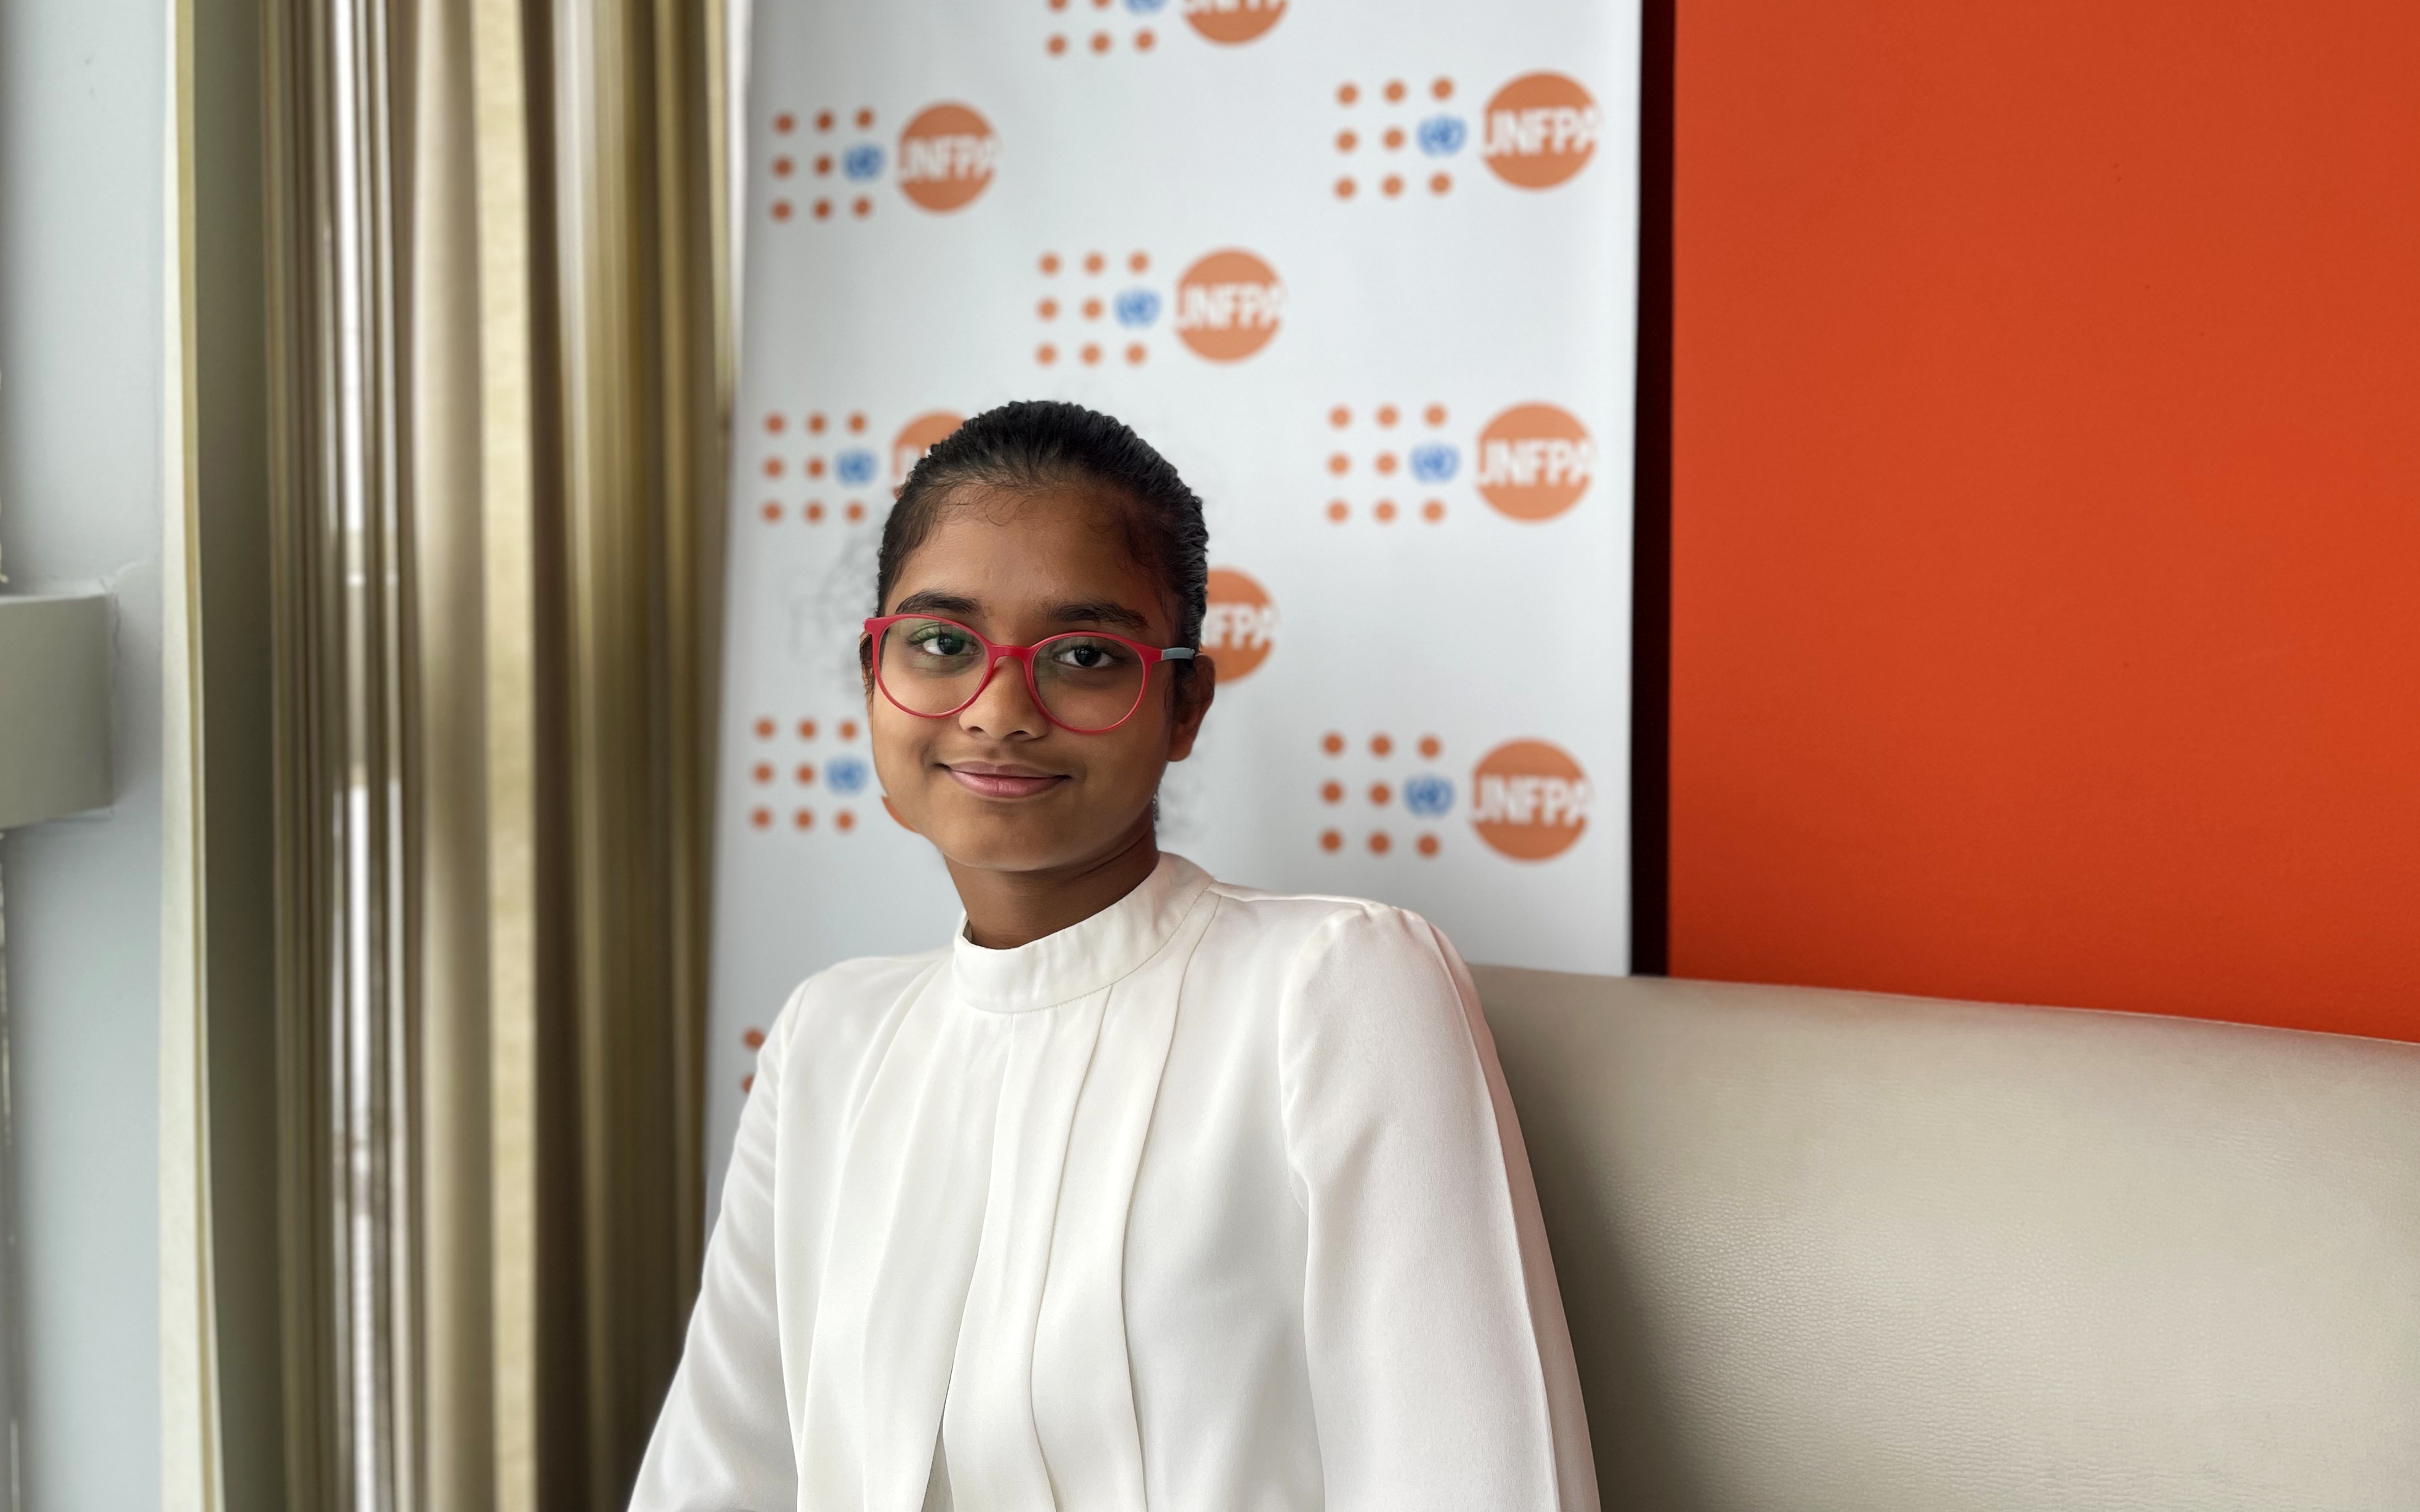 Imani's smile reflects the pride and hope of youth, capturing the spirit of her day at UNFPA where her voice and vision found a platform to inspire others